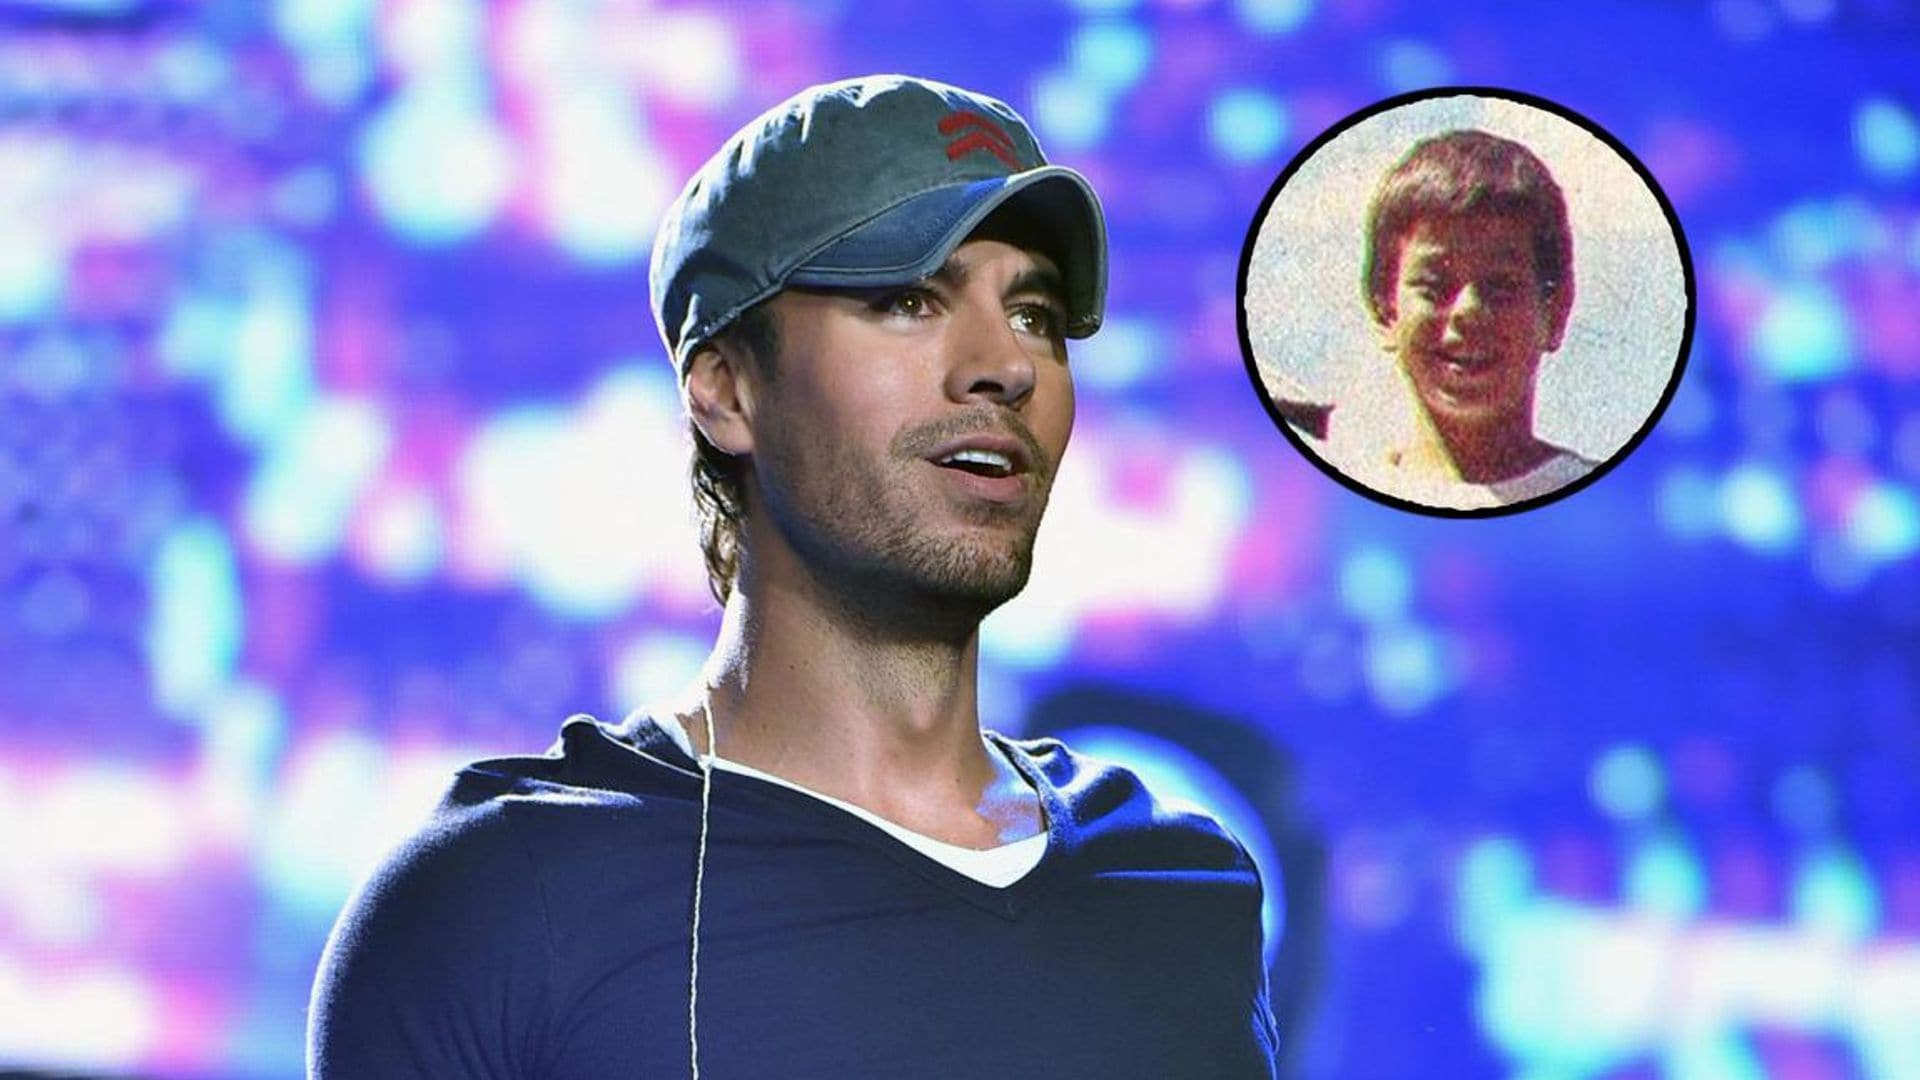 Enrique Iglesias shares cute throwback with his brother - see the pic!